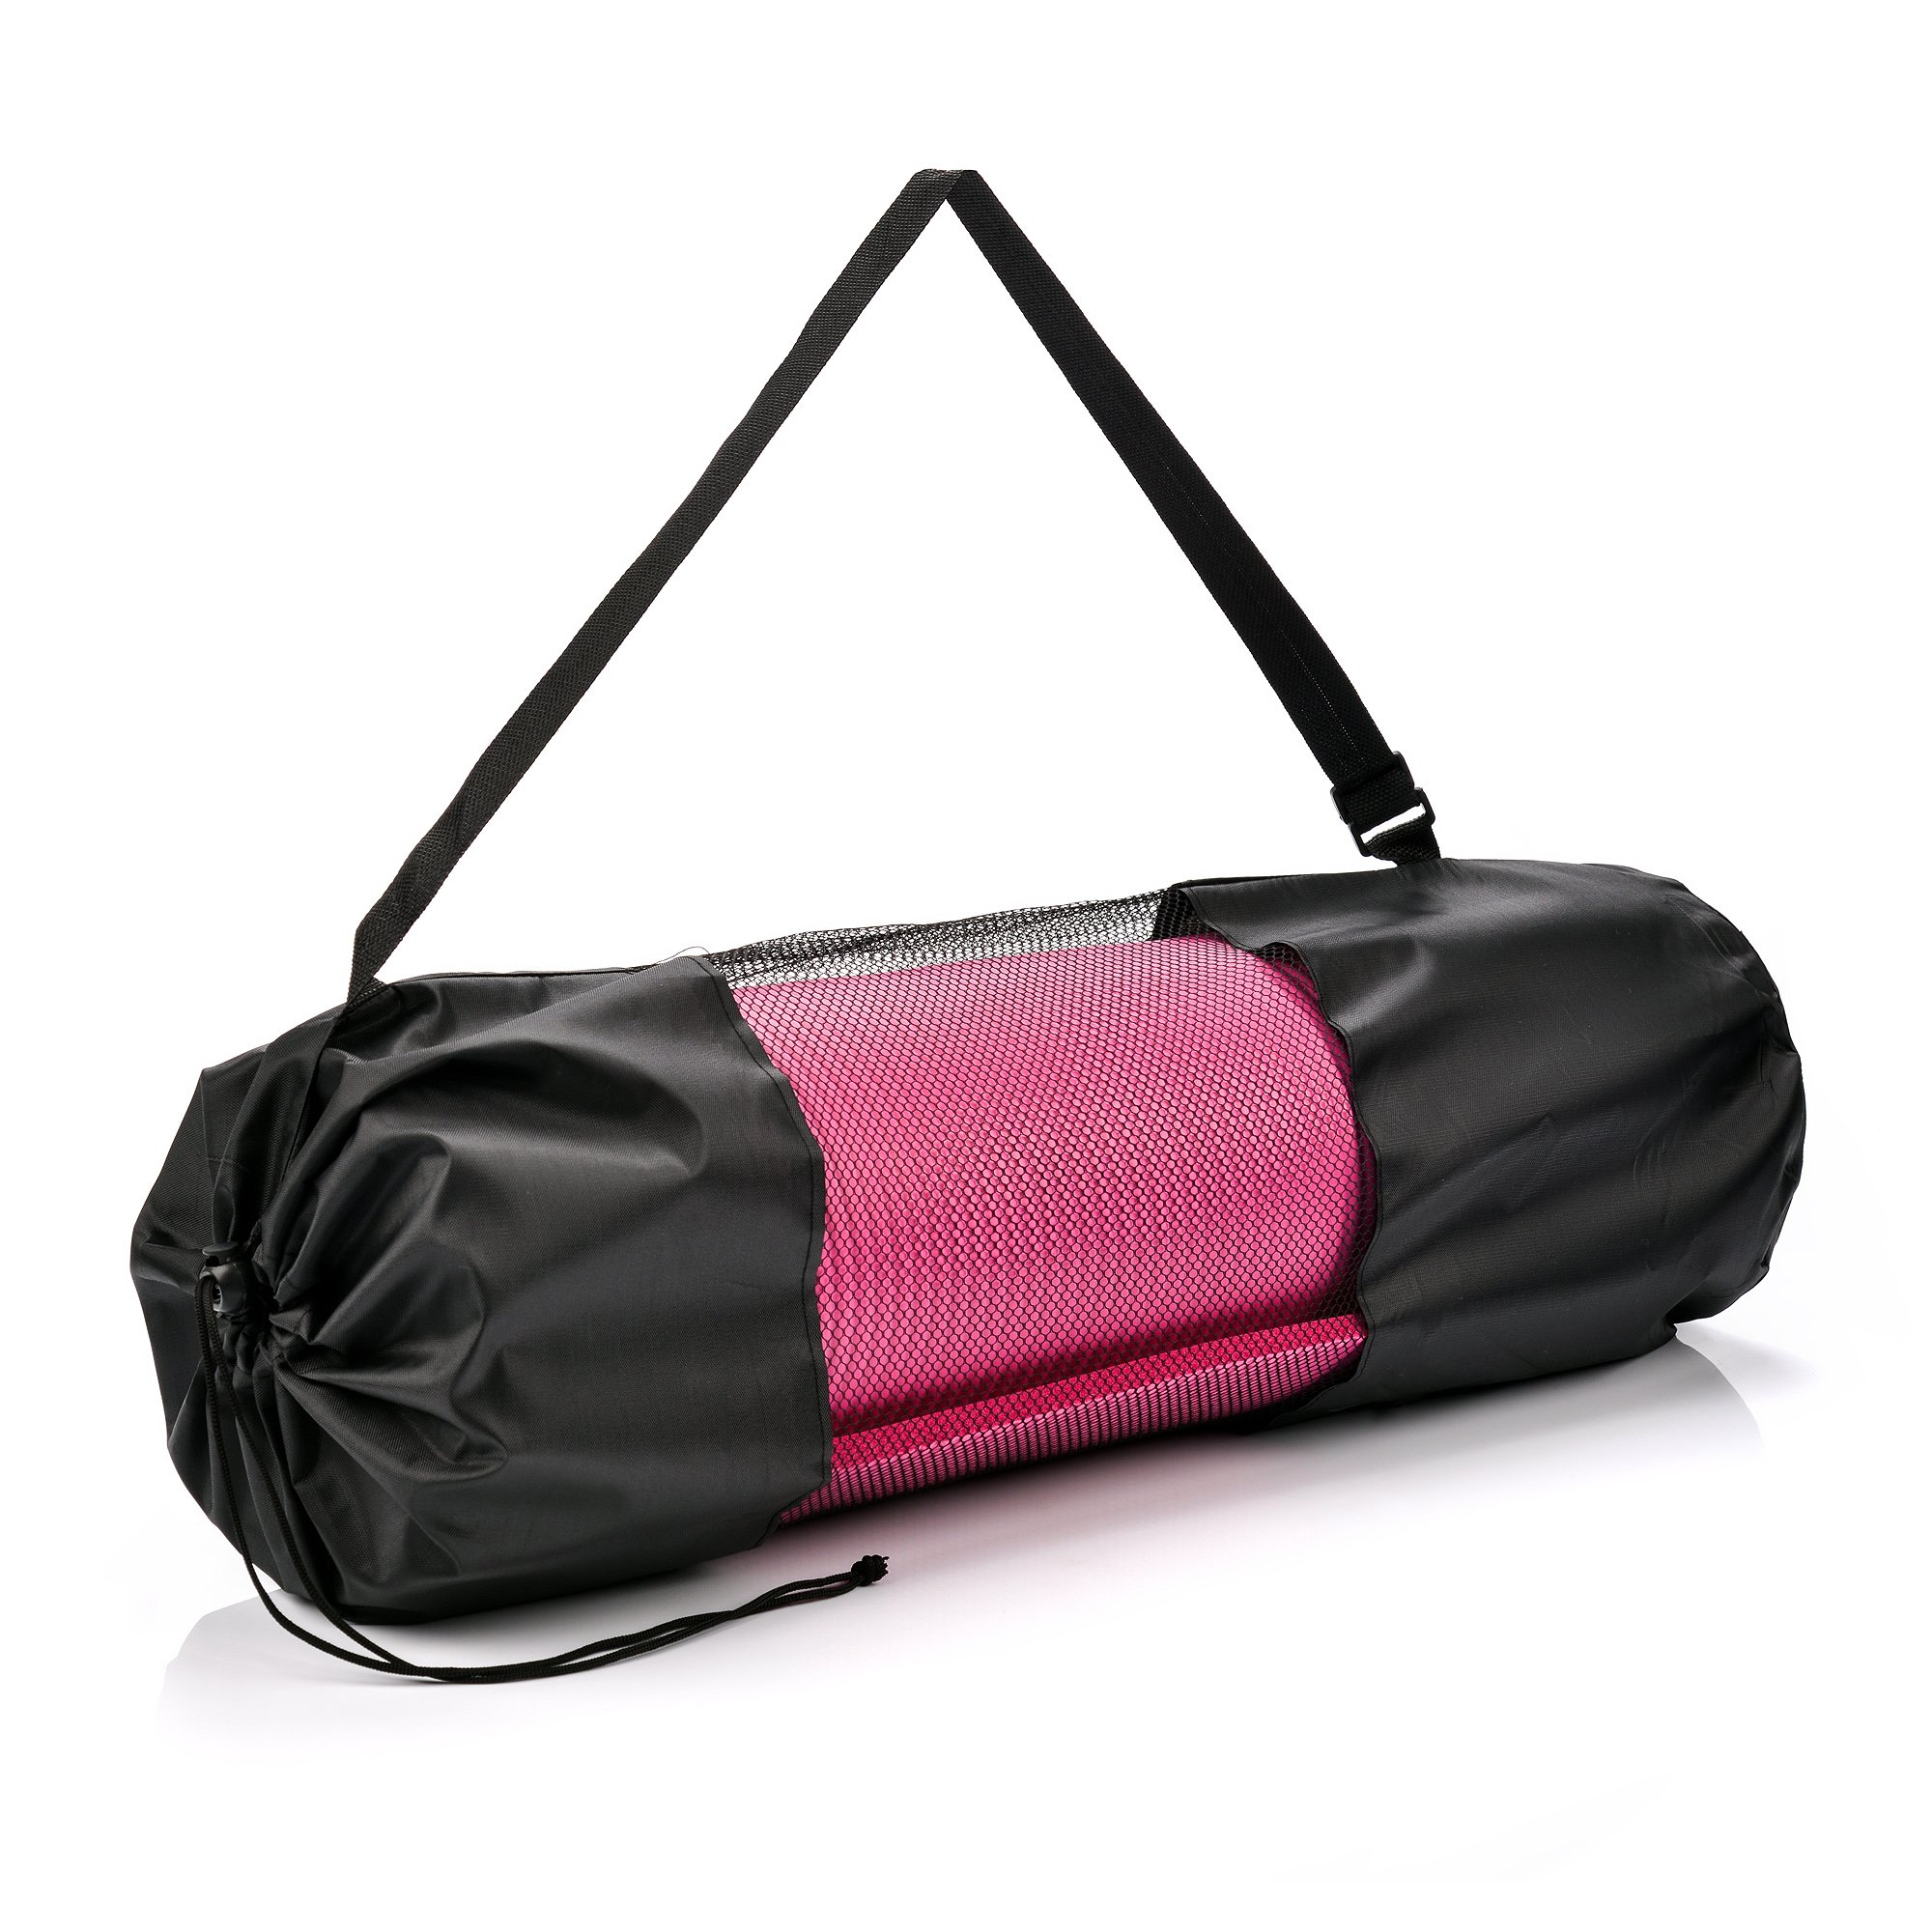 YUREN Thick and Soft NBR Foam Phthalate-Free Yoga Mat with Bag